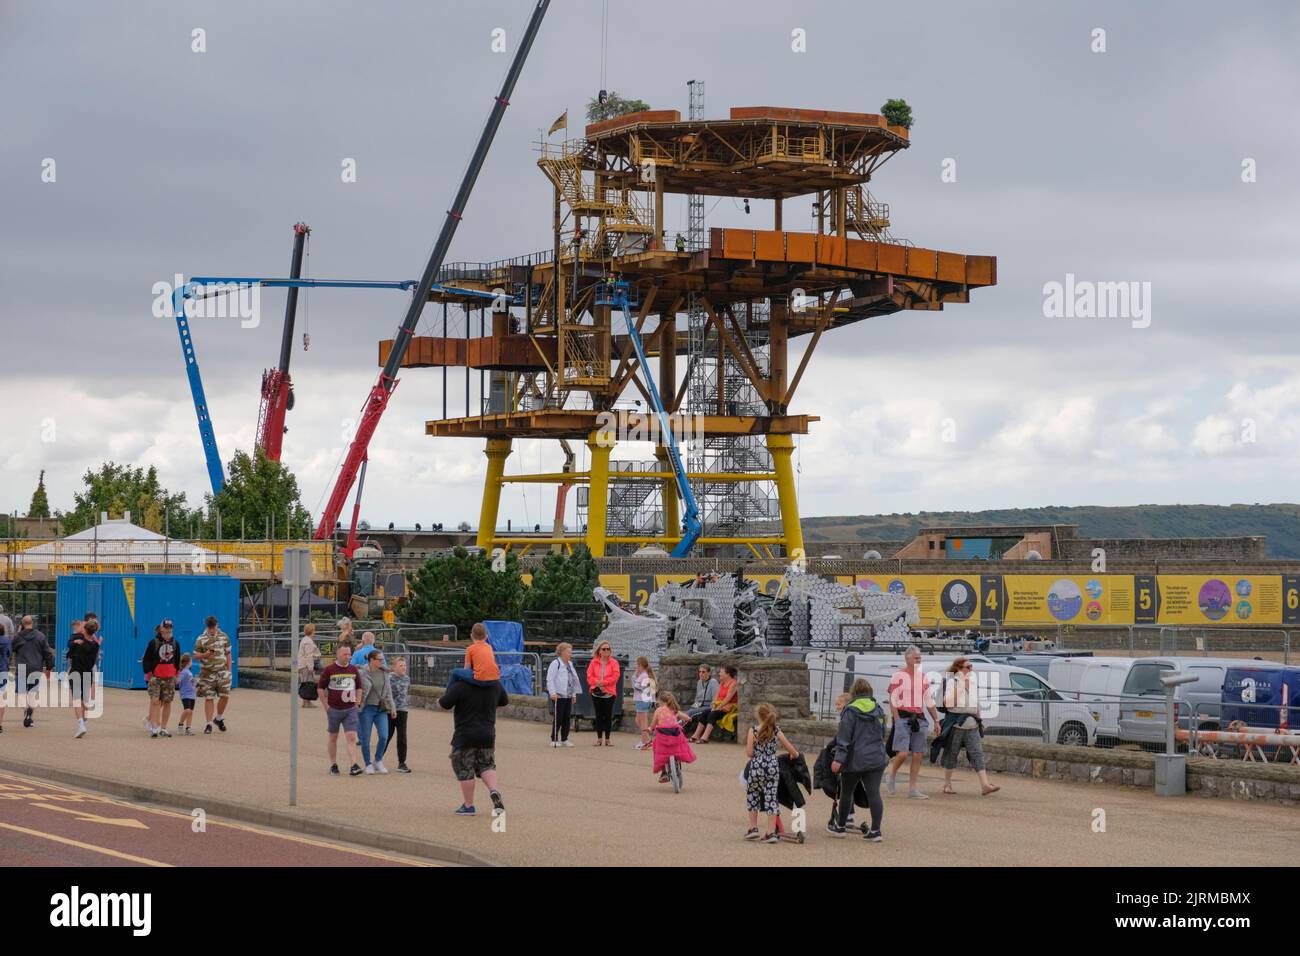 Weston-super-Mare, UK. 25th Aug, 2022. Government funded artwork See Monster announces further delays. The August Bank holiday will be missed with opening now scheduled for the end of September. A July opening was originally planned. See Monster is an art installation made from a retired oil rig re-assembled on the beach at Weston. The artwork is part of Unboxed a UK Government funded showcase of British creativity once thought to be the festival of Brexit. A public viewing gallery has opened so people can see progress. Credit: JMF News/ Alamy Live News Stock Photo